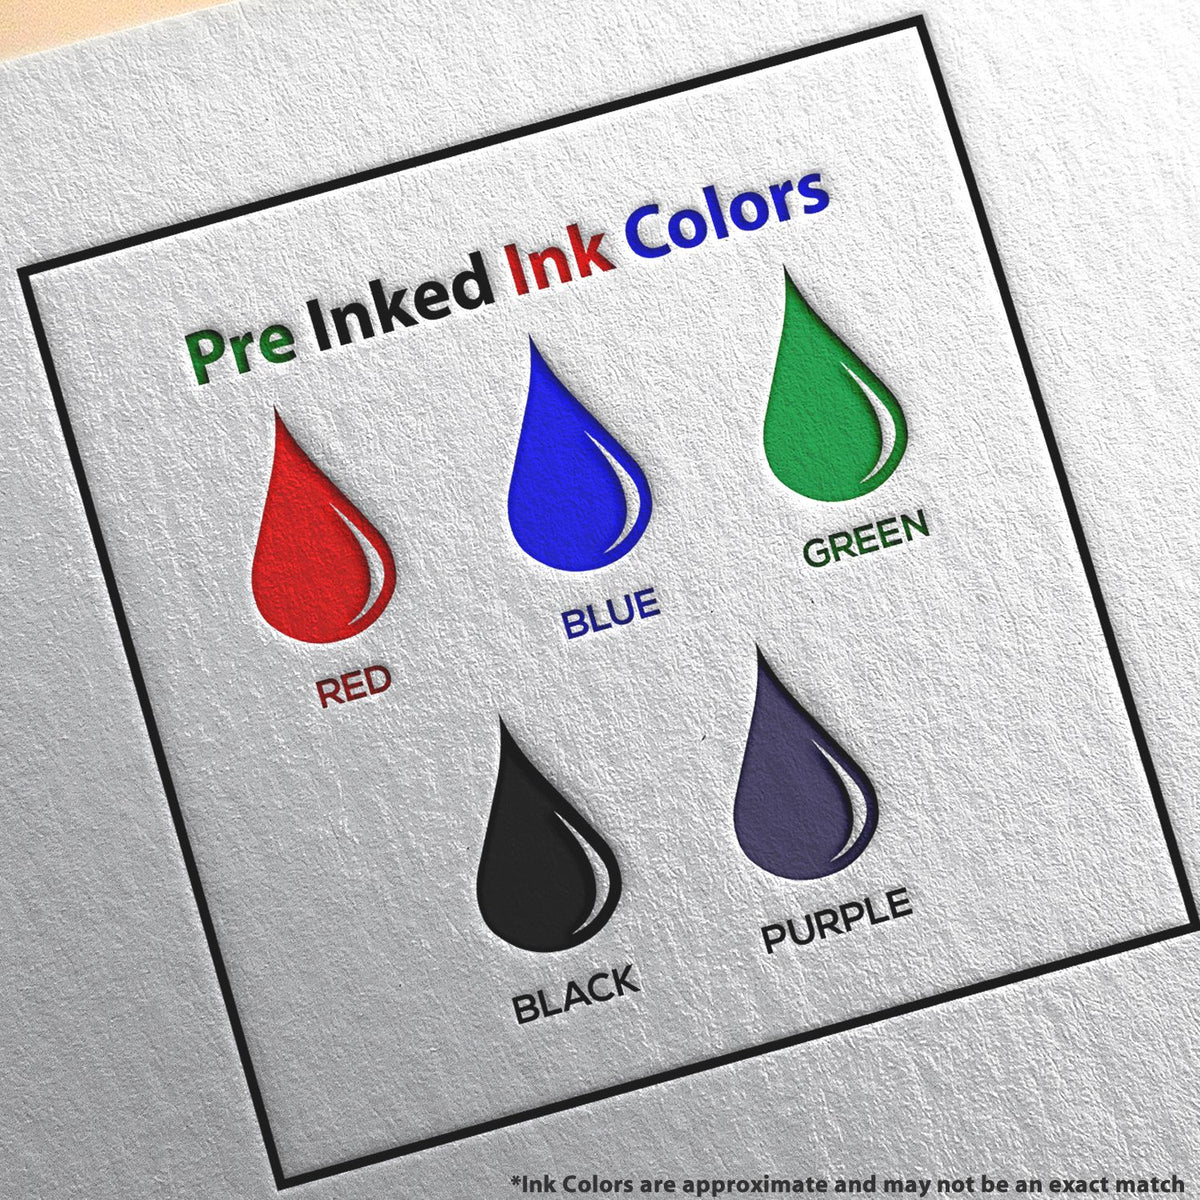 A picture showing the different ink colors or hues available for the Slim Pre-Inked Delaware Landscape Architect Seal Stamp product.